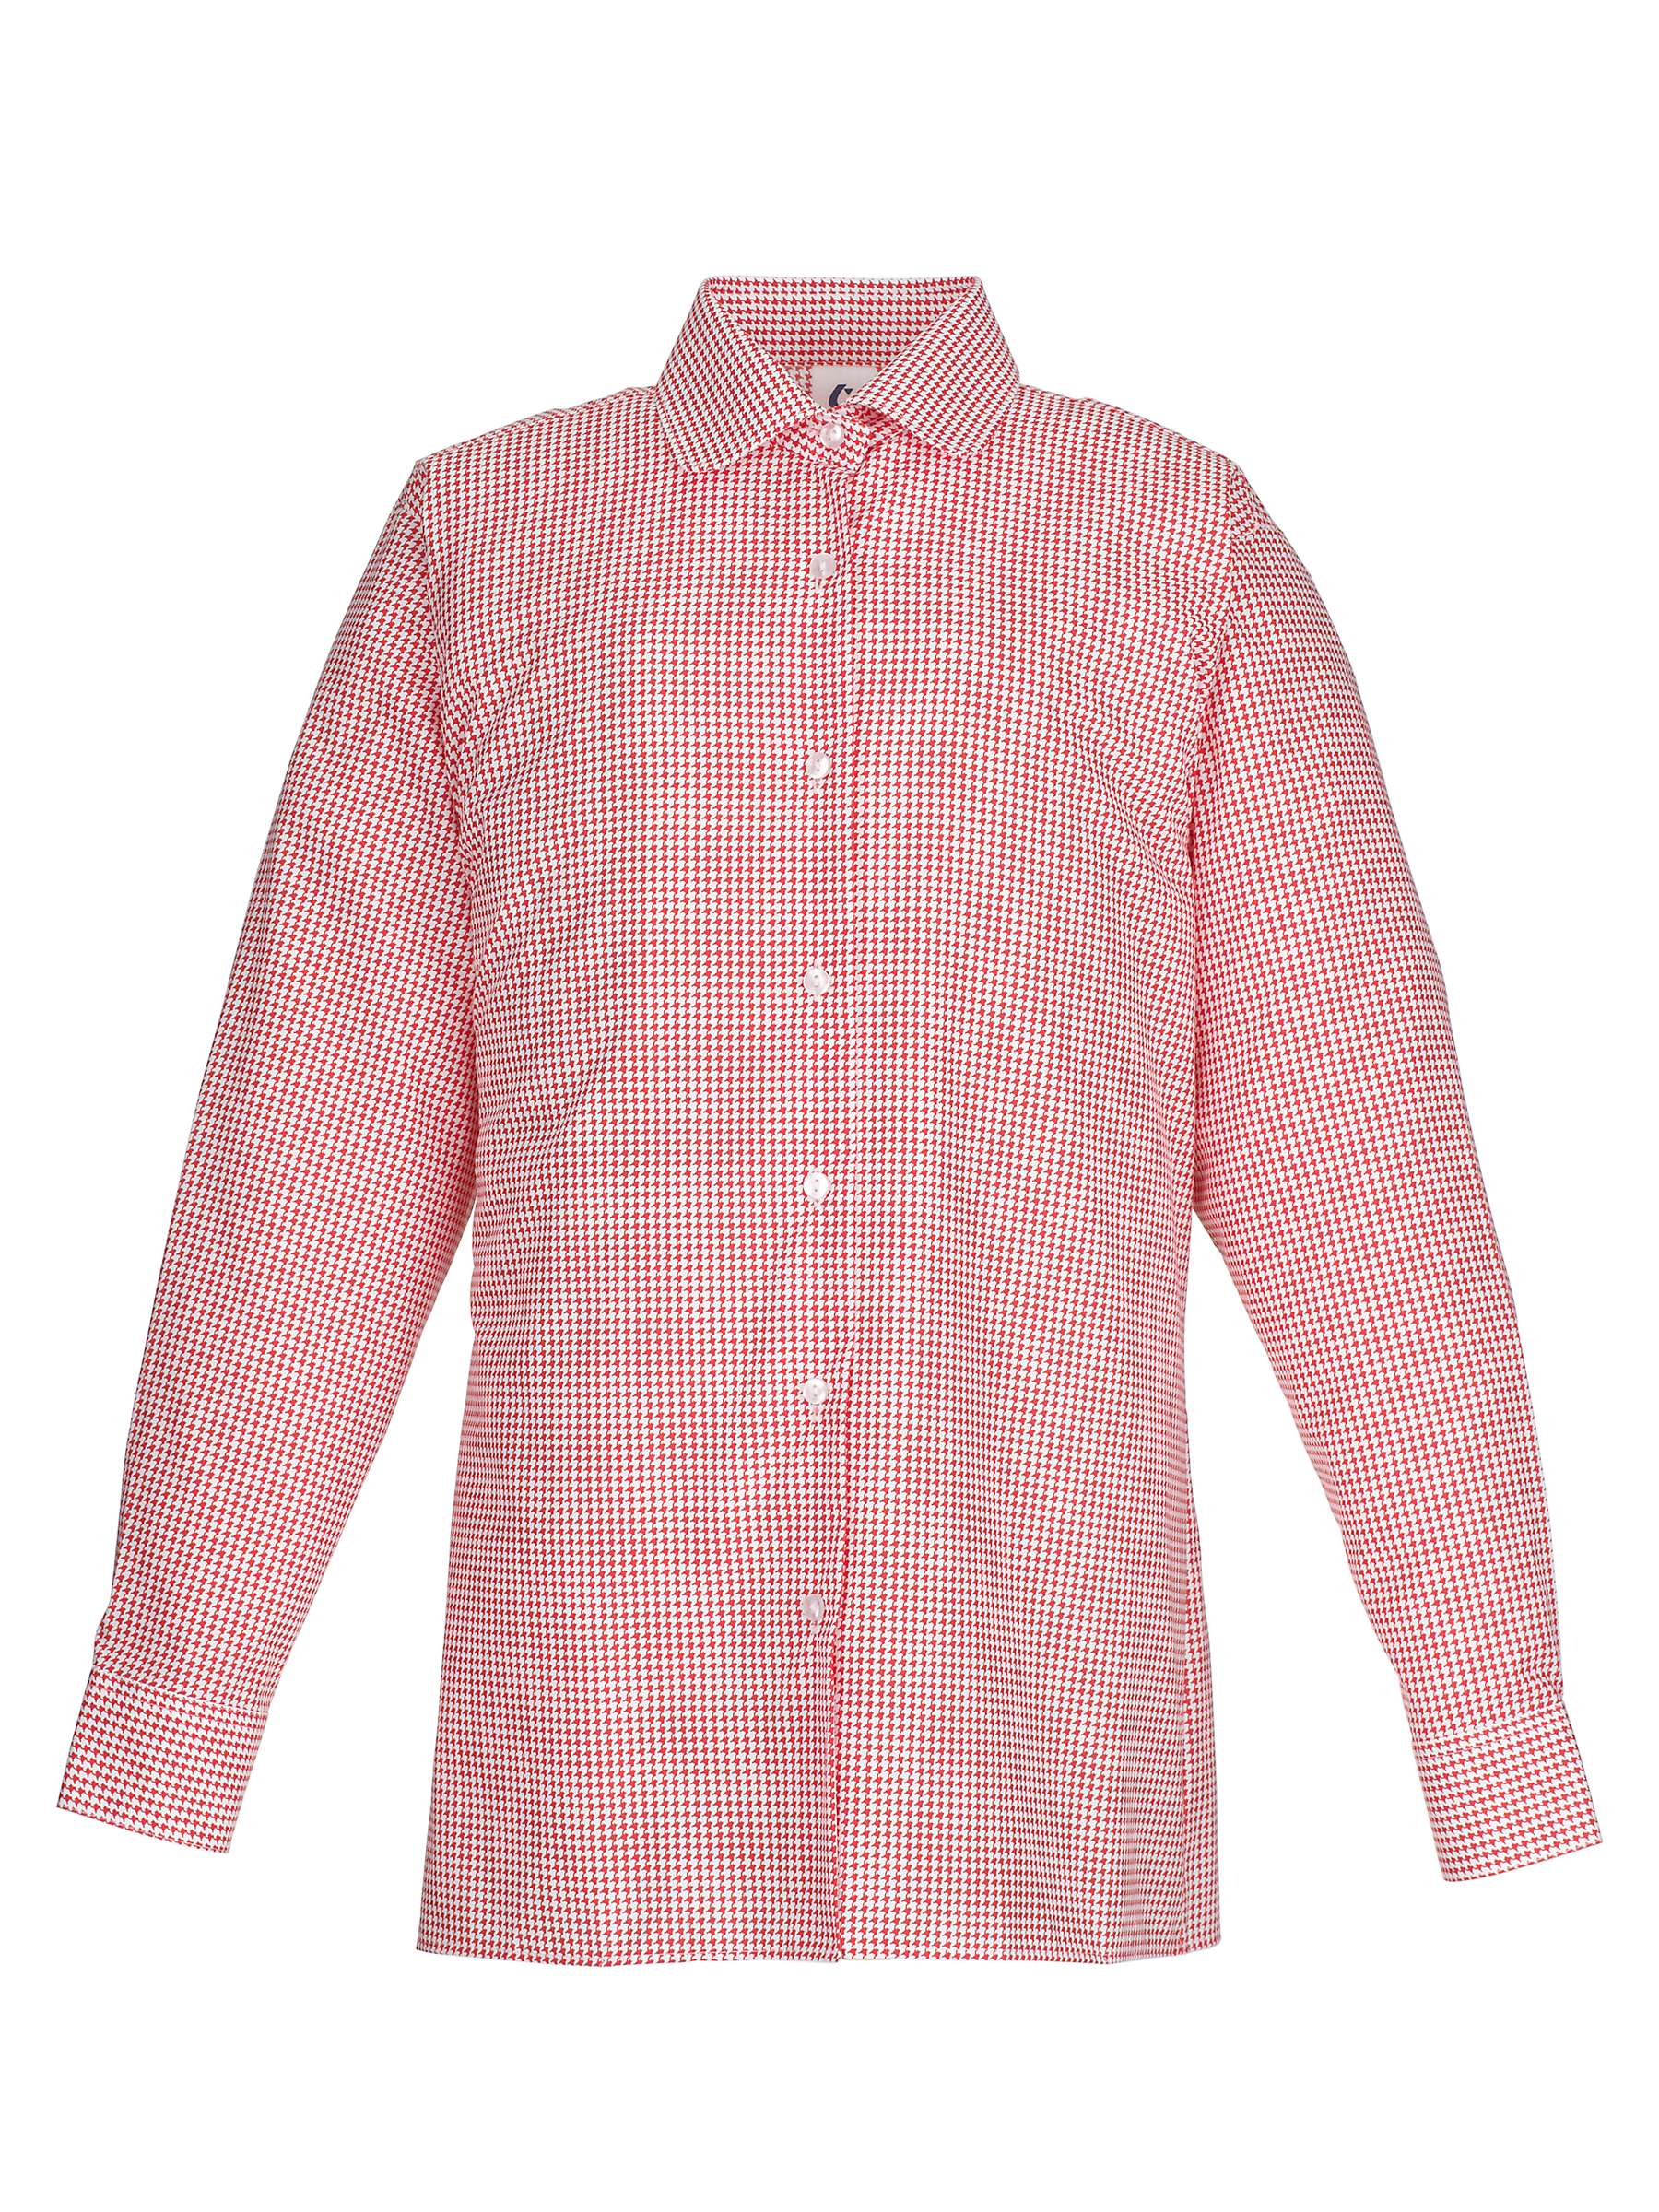 Buy School Girls' Long Sleeve Blouse, Pack of 2, Red/White Online at johnlewis.com